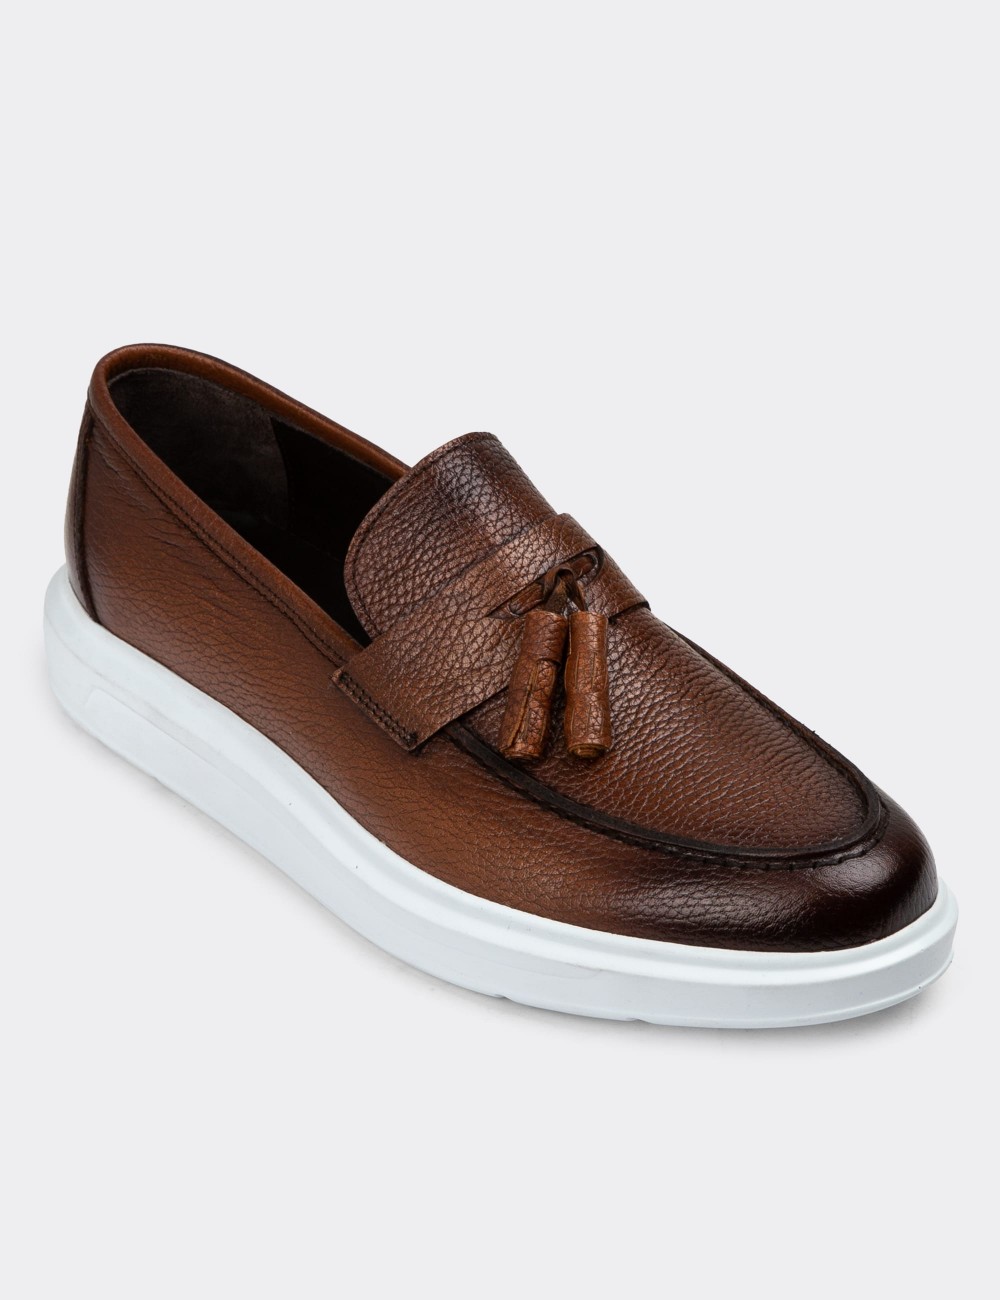 Tan Leather Loafers - 01587MTBAP08